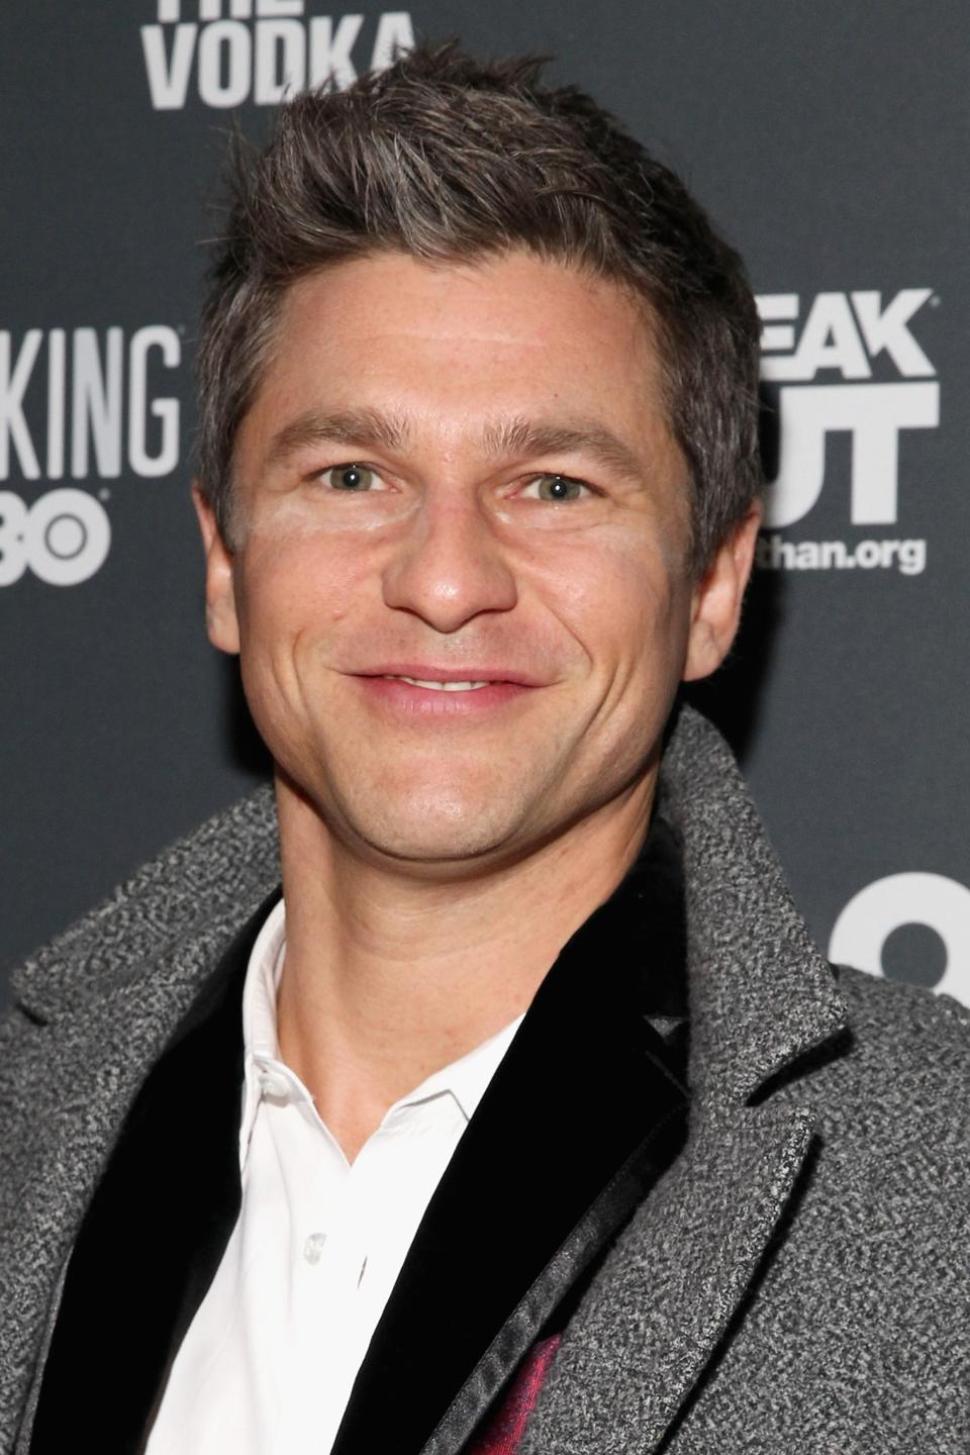 David Burtka can call on Neil Patrick Harris’ savvy for his upcoming cabaret show.